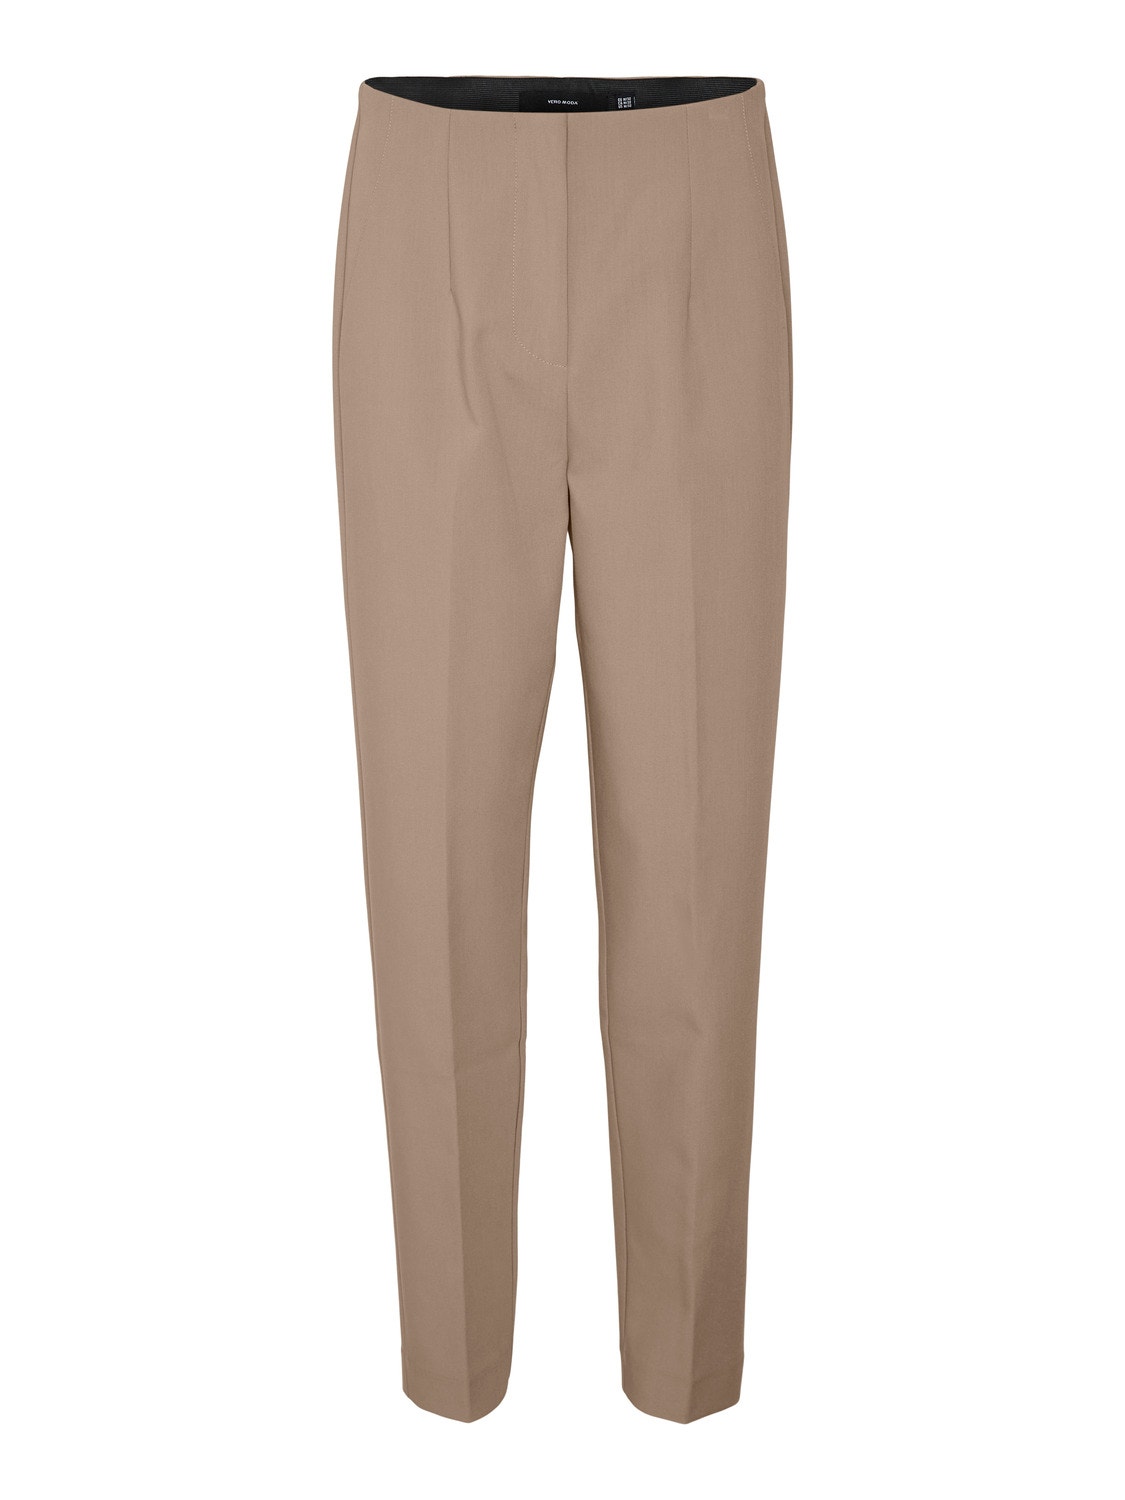 Moda® | VMSANDY Vero 40% with High rise Trousers discount!